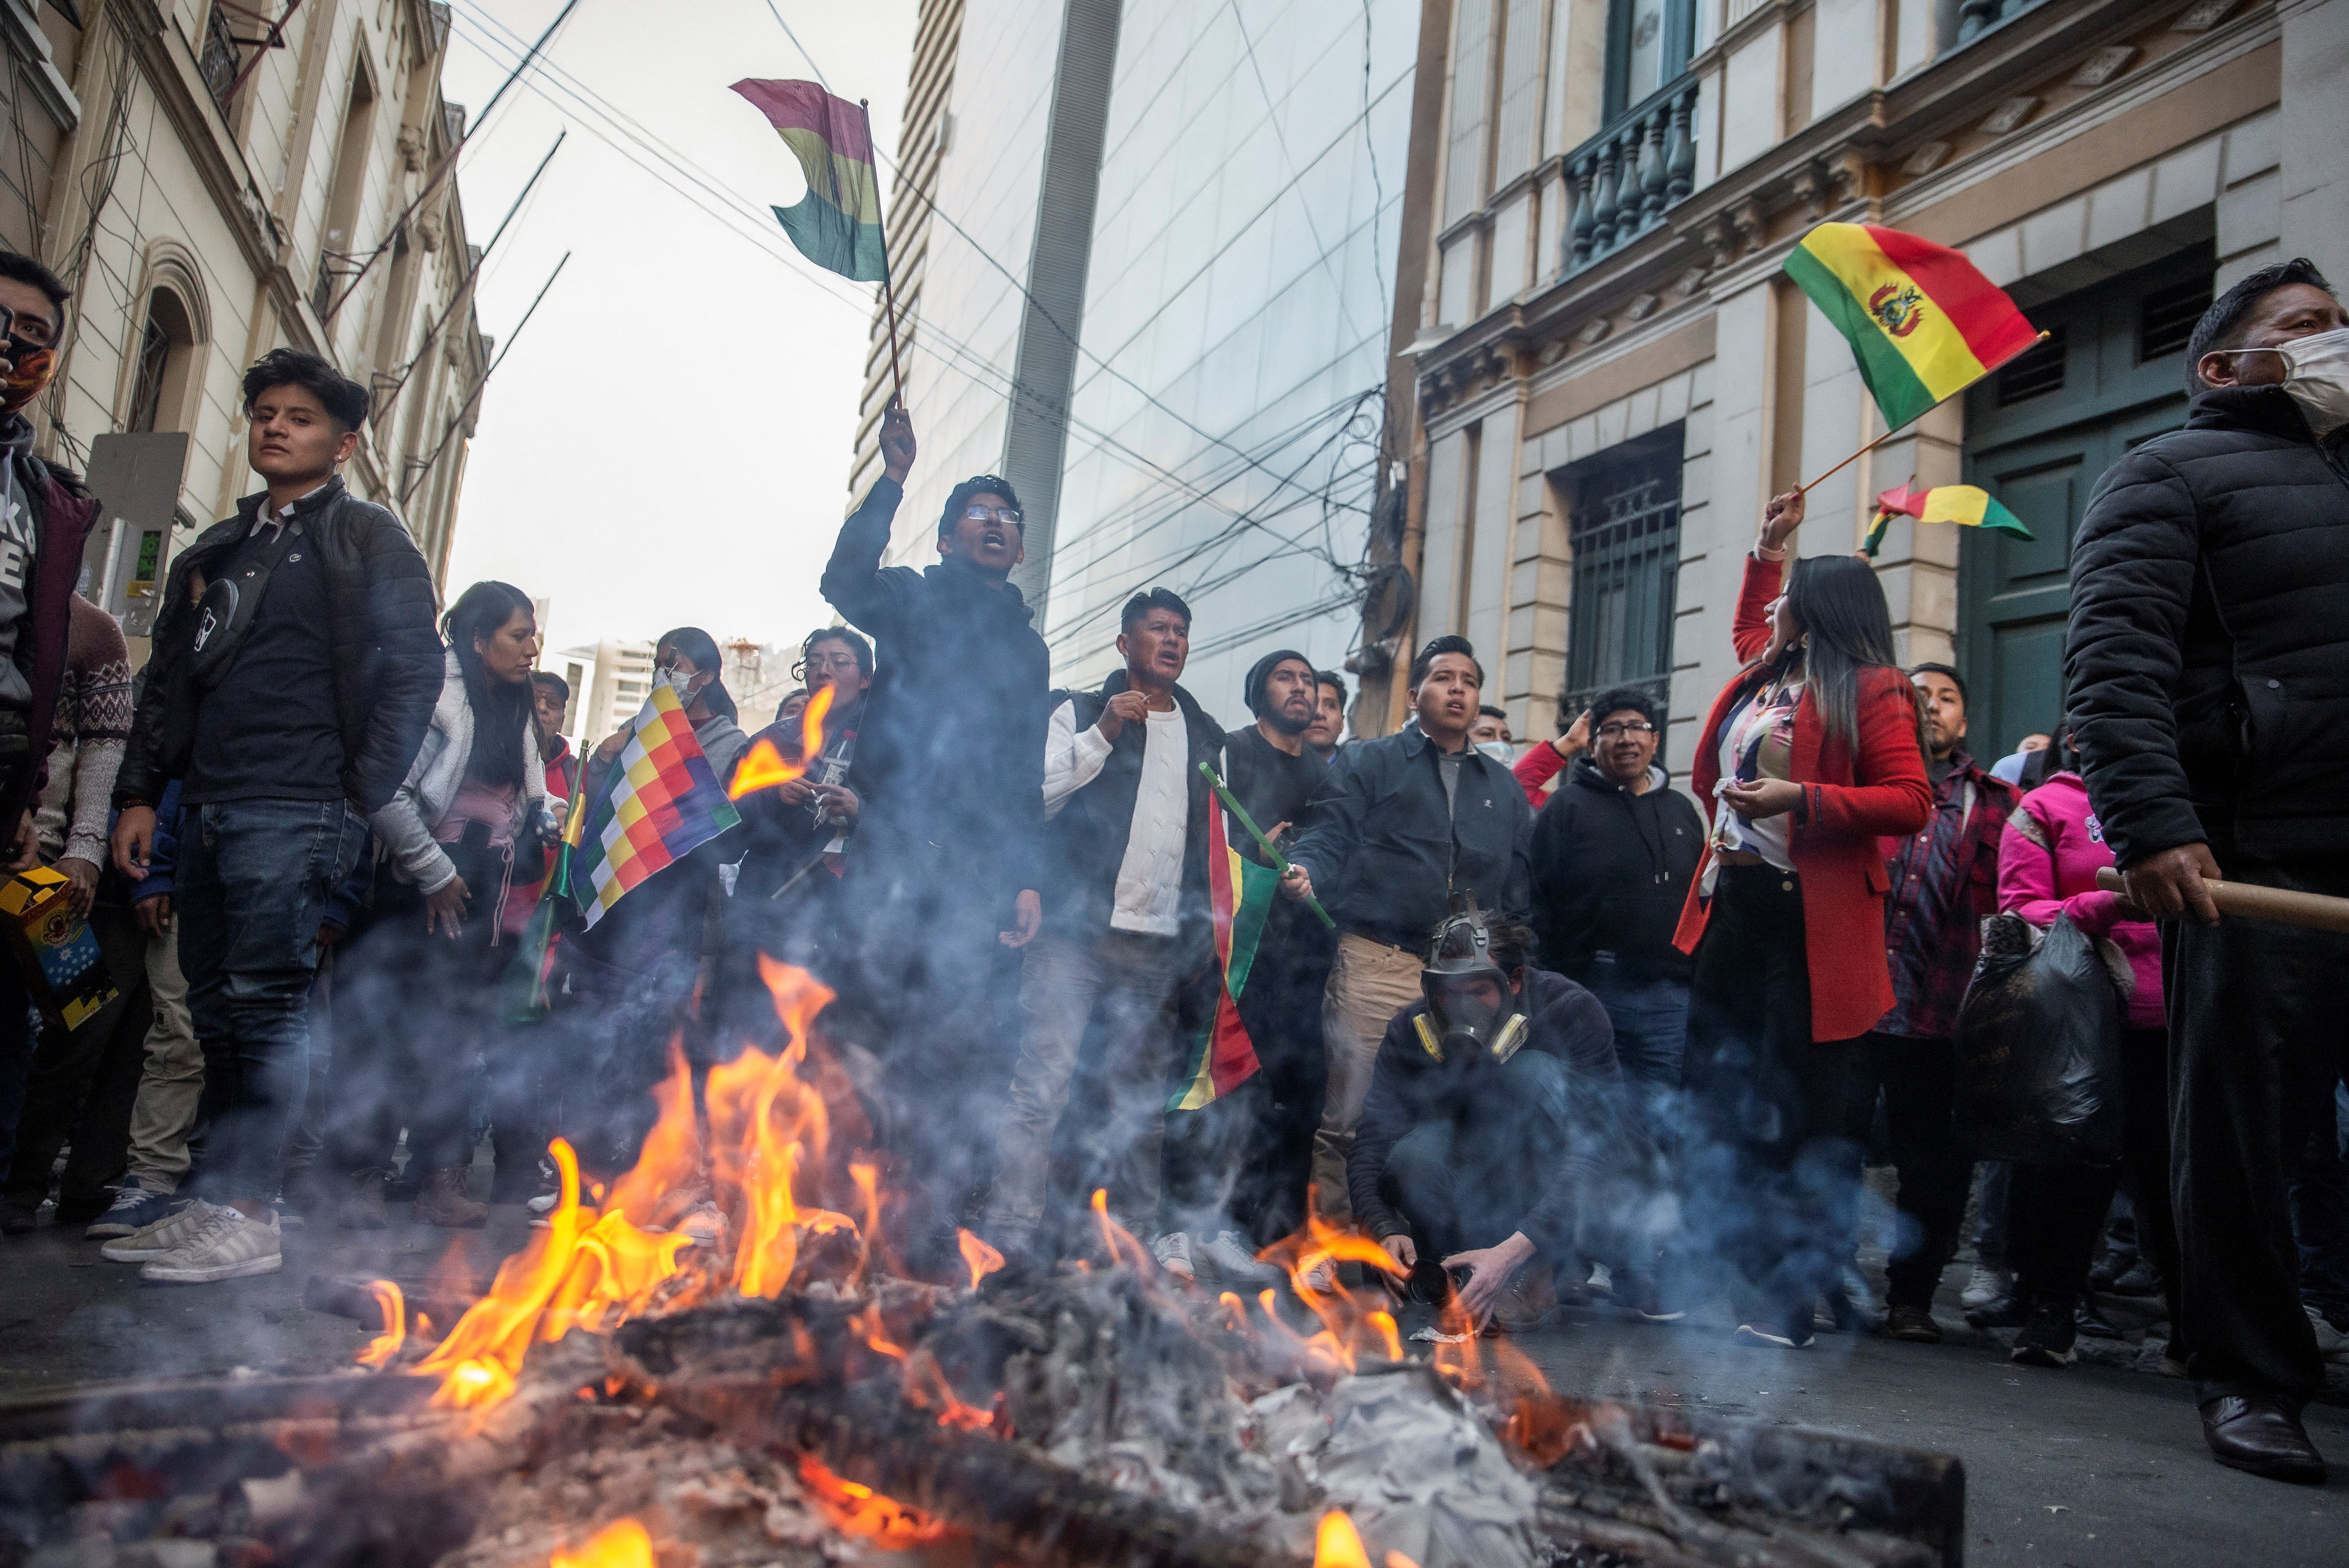 People wave Bolivia's national flag as they yell at the military police during a coup attempt against the government of Bolivian President Luis Arce by military units